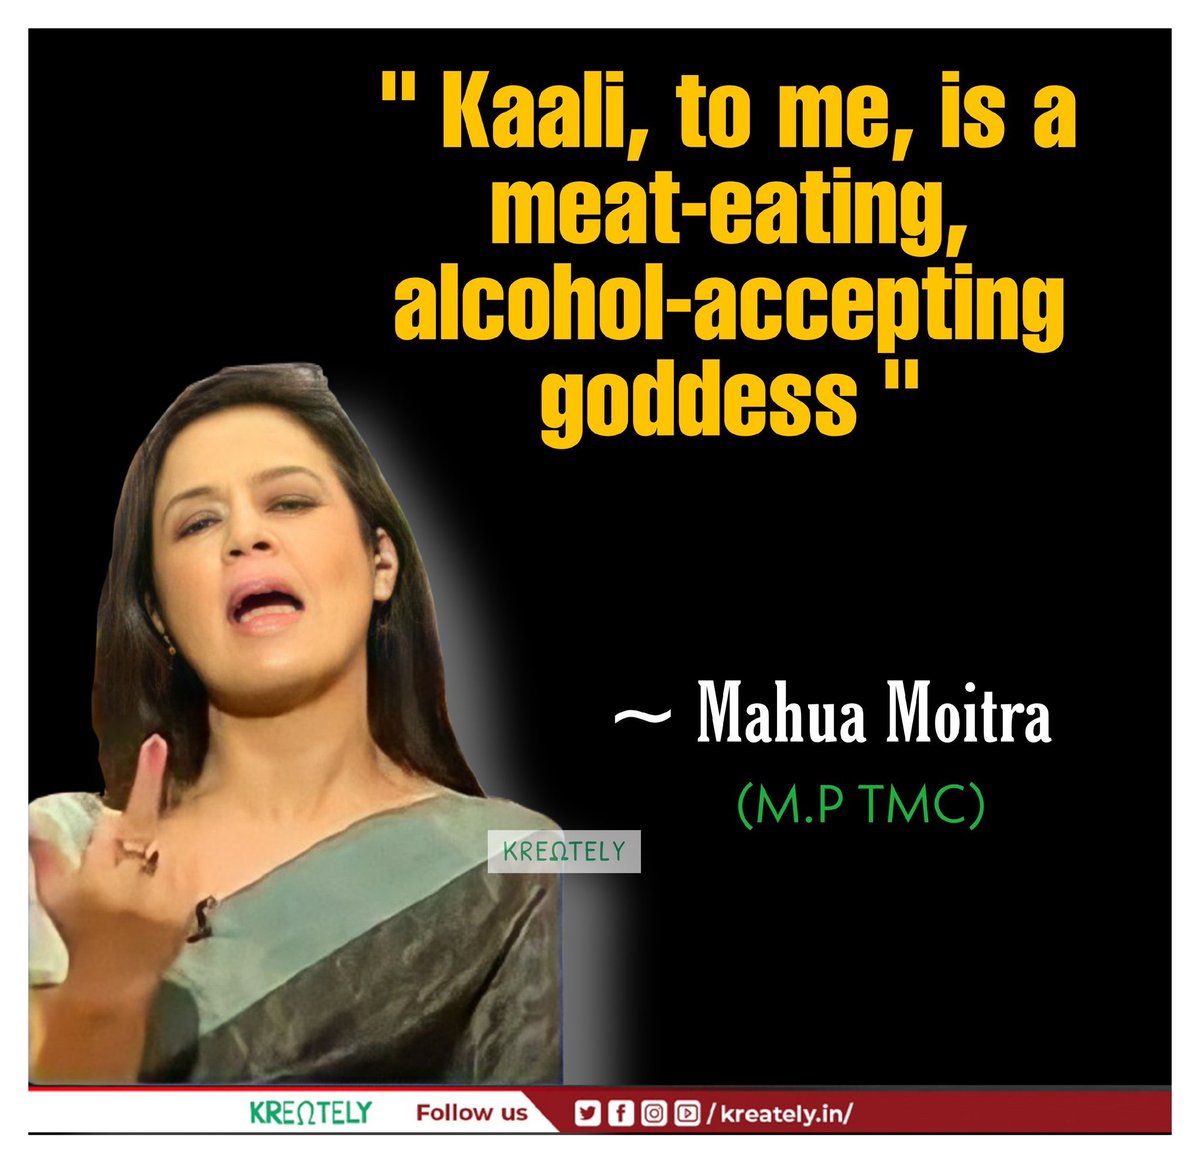 PallaviCT on X: @sardesairajdeep @IndiaToday @MahuaMoitra Mahua Moitra a star? What great work has she done in her constituency? Or is star status given on basis of English fluency, ability to copy